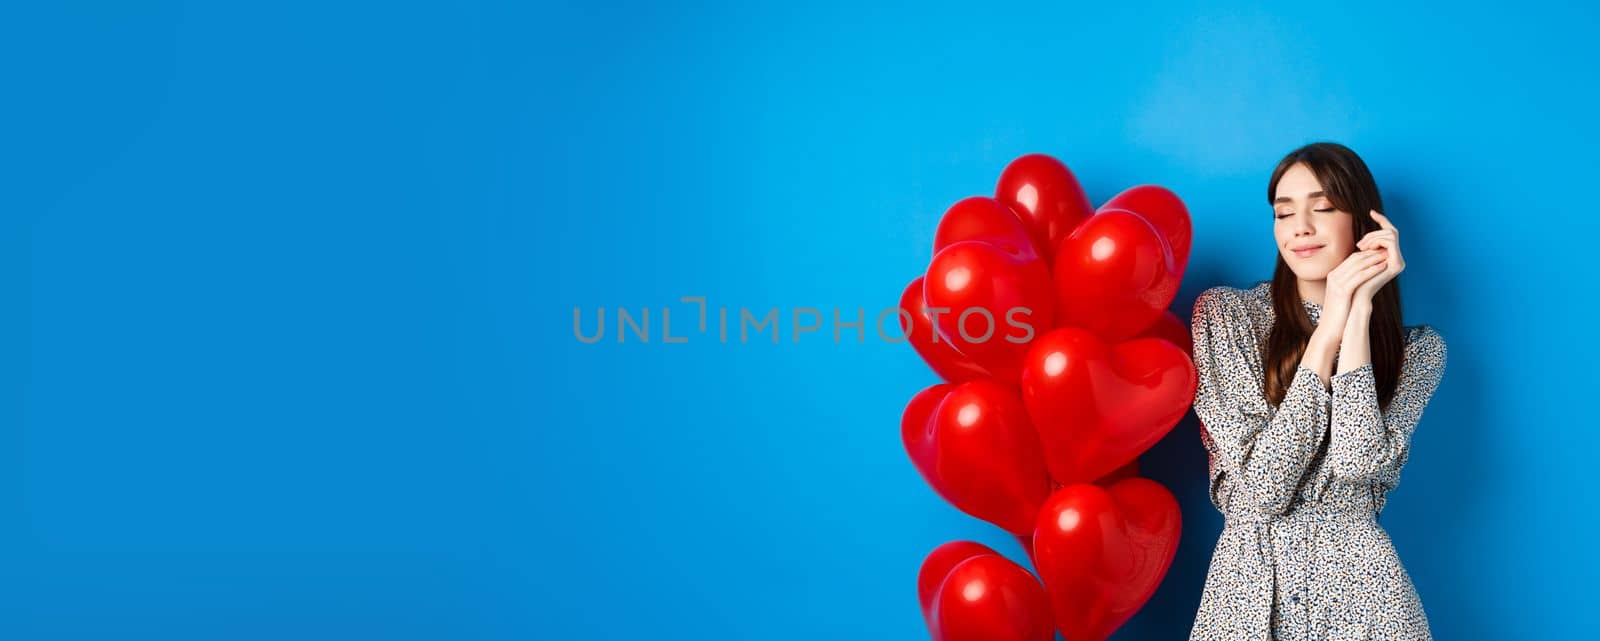 Valentines day. Dreamy romantic woman close eyes and imaging lovely date, standing near heart balloons and smiling, blue background by Benzoix